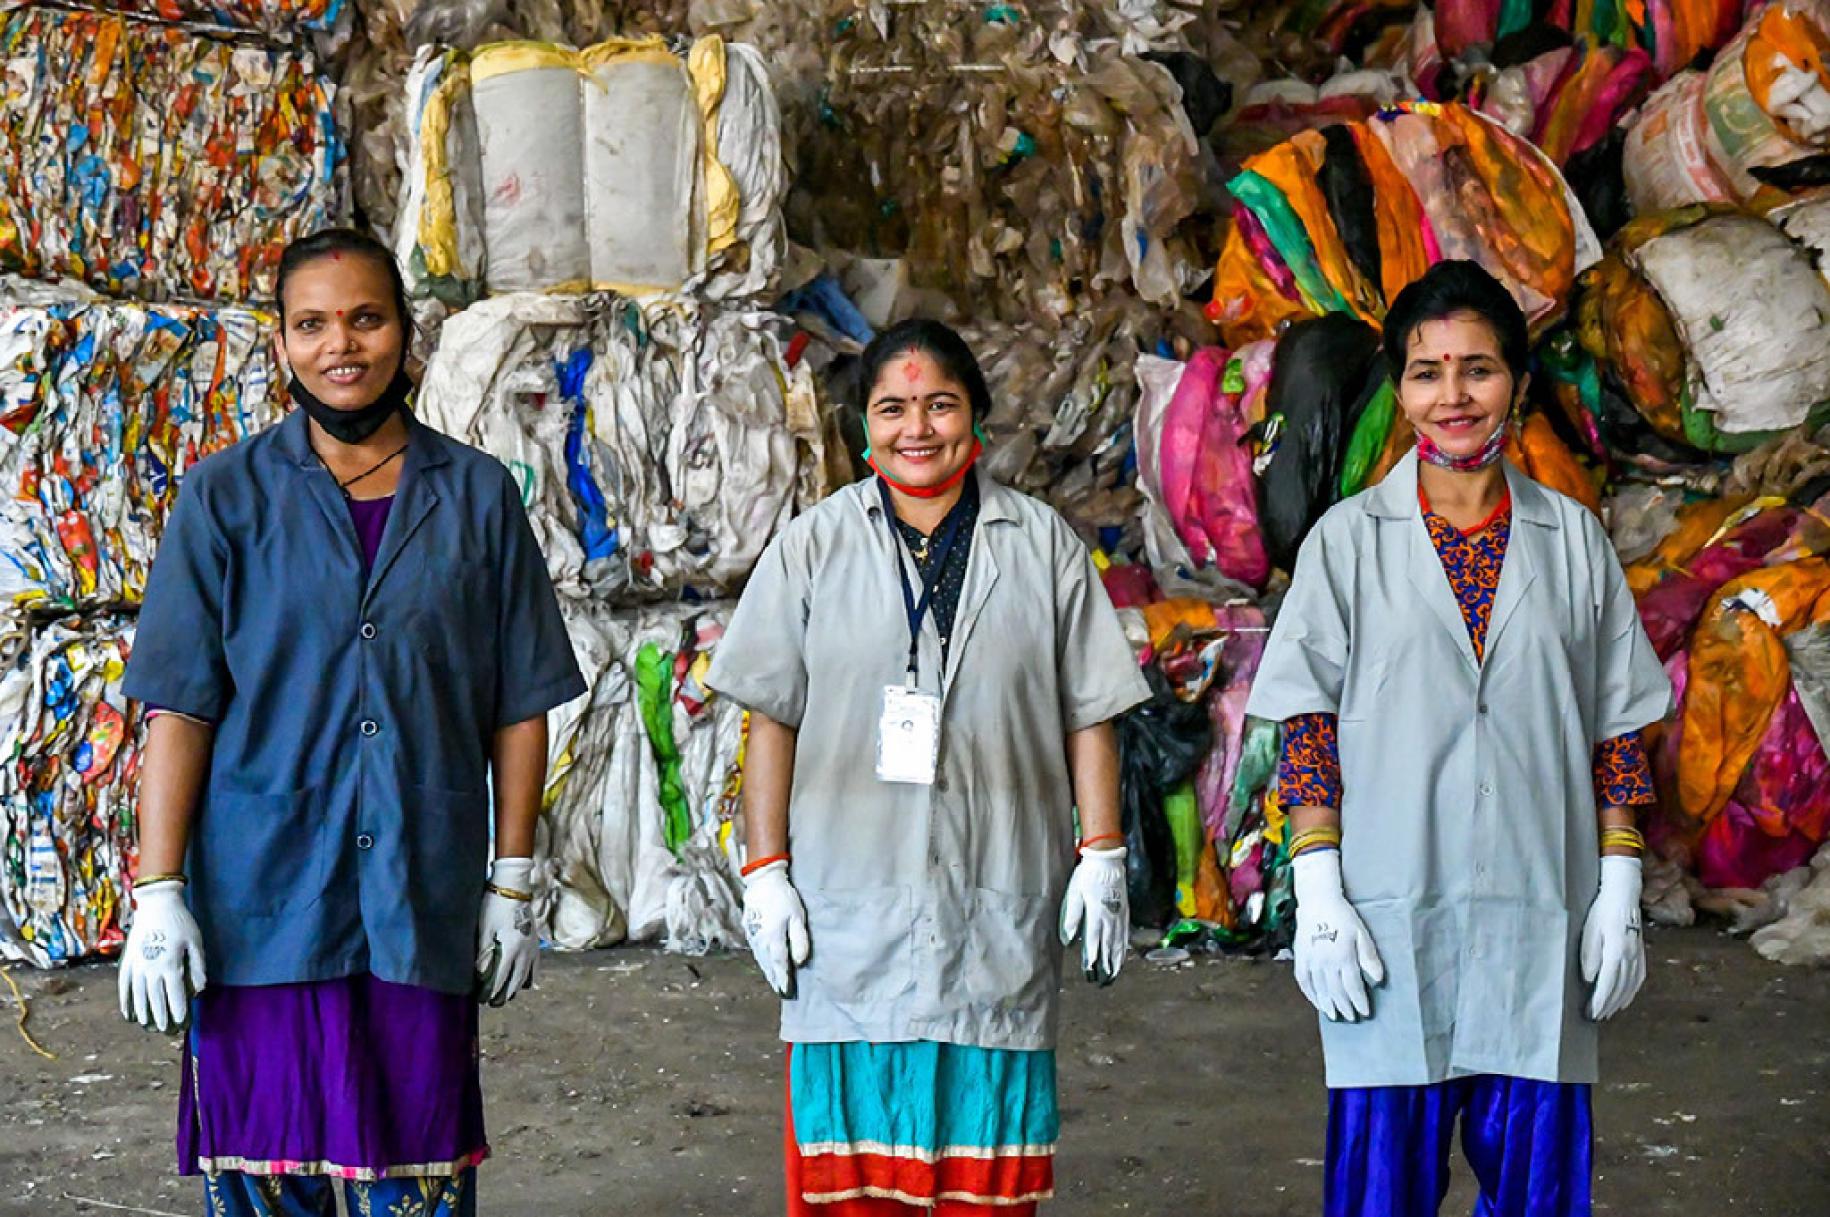 Three women smile at the camera in front of large piles of packaged waste.